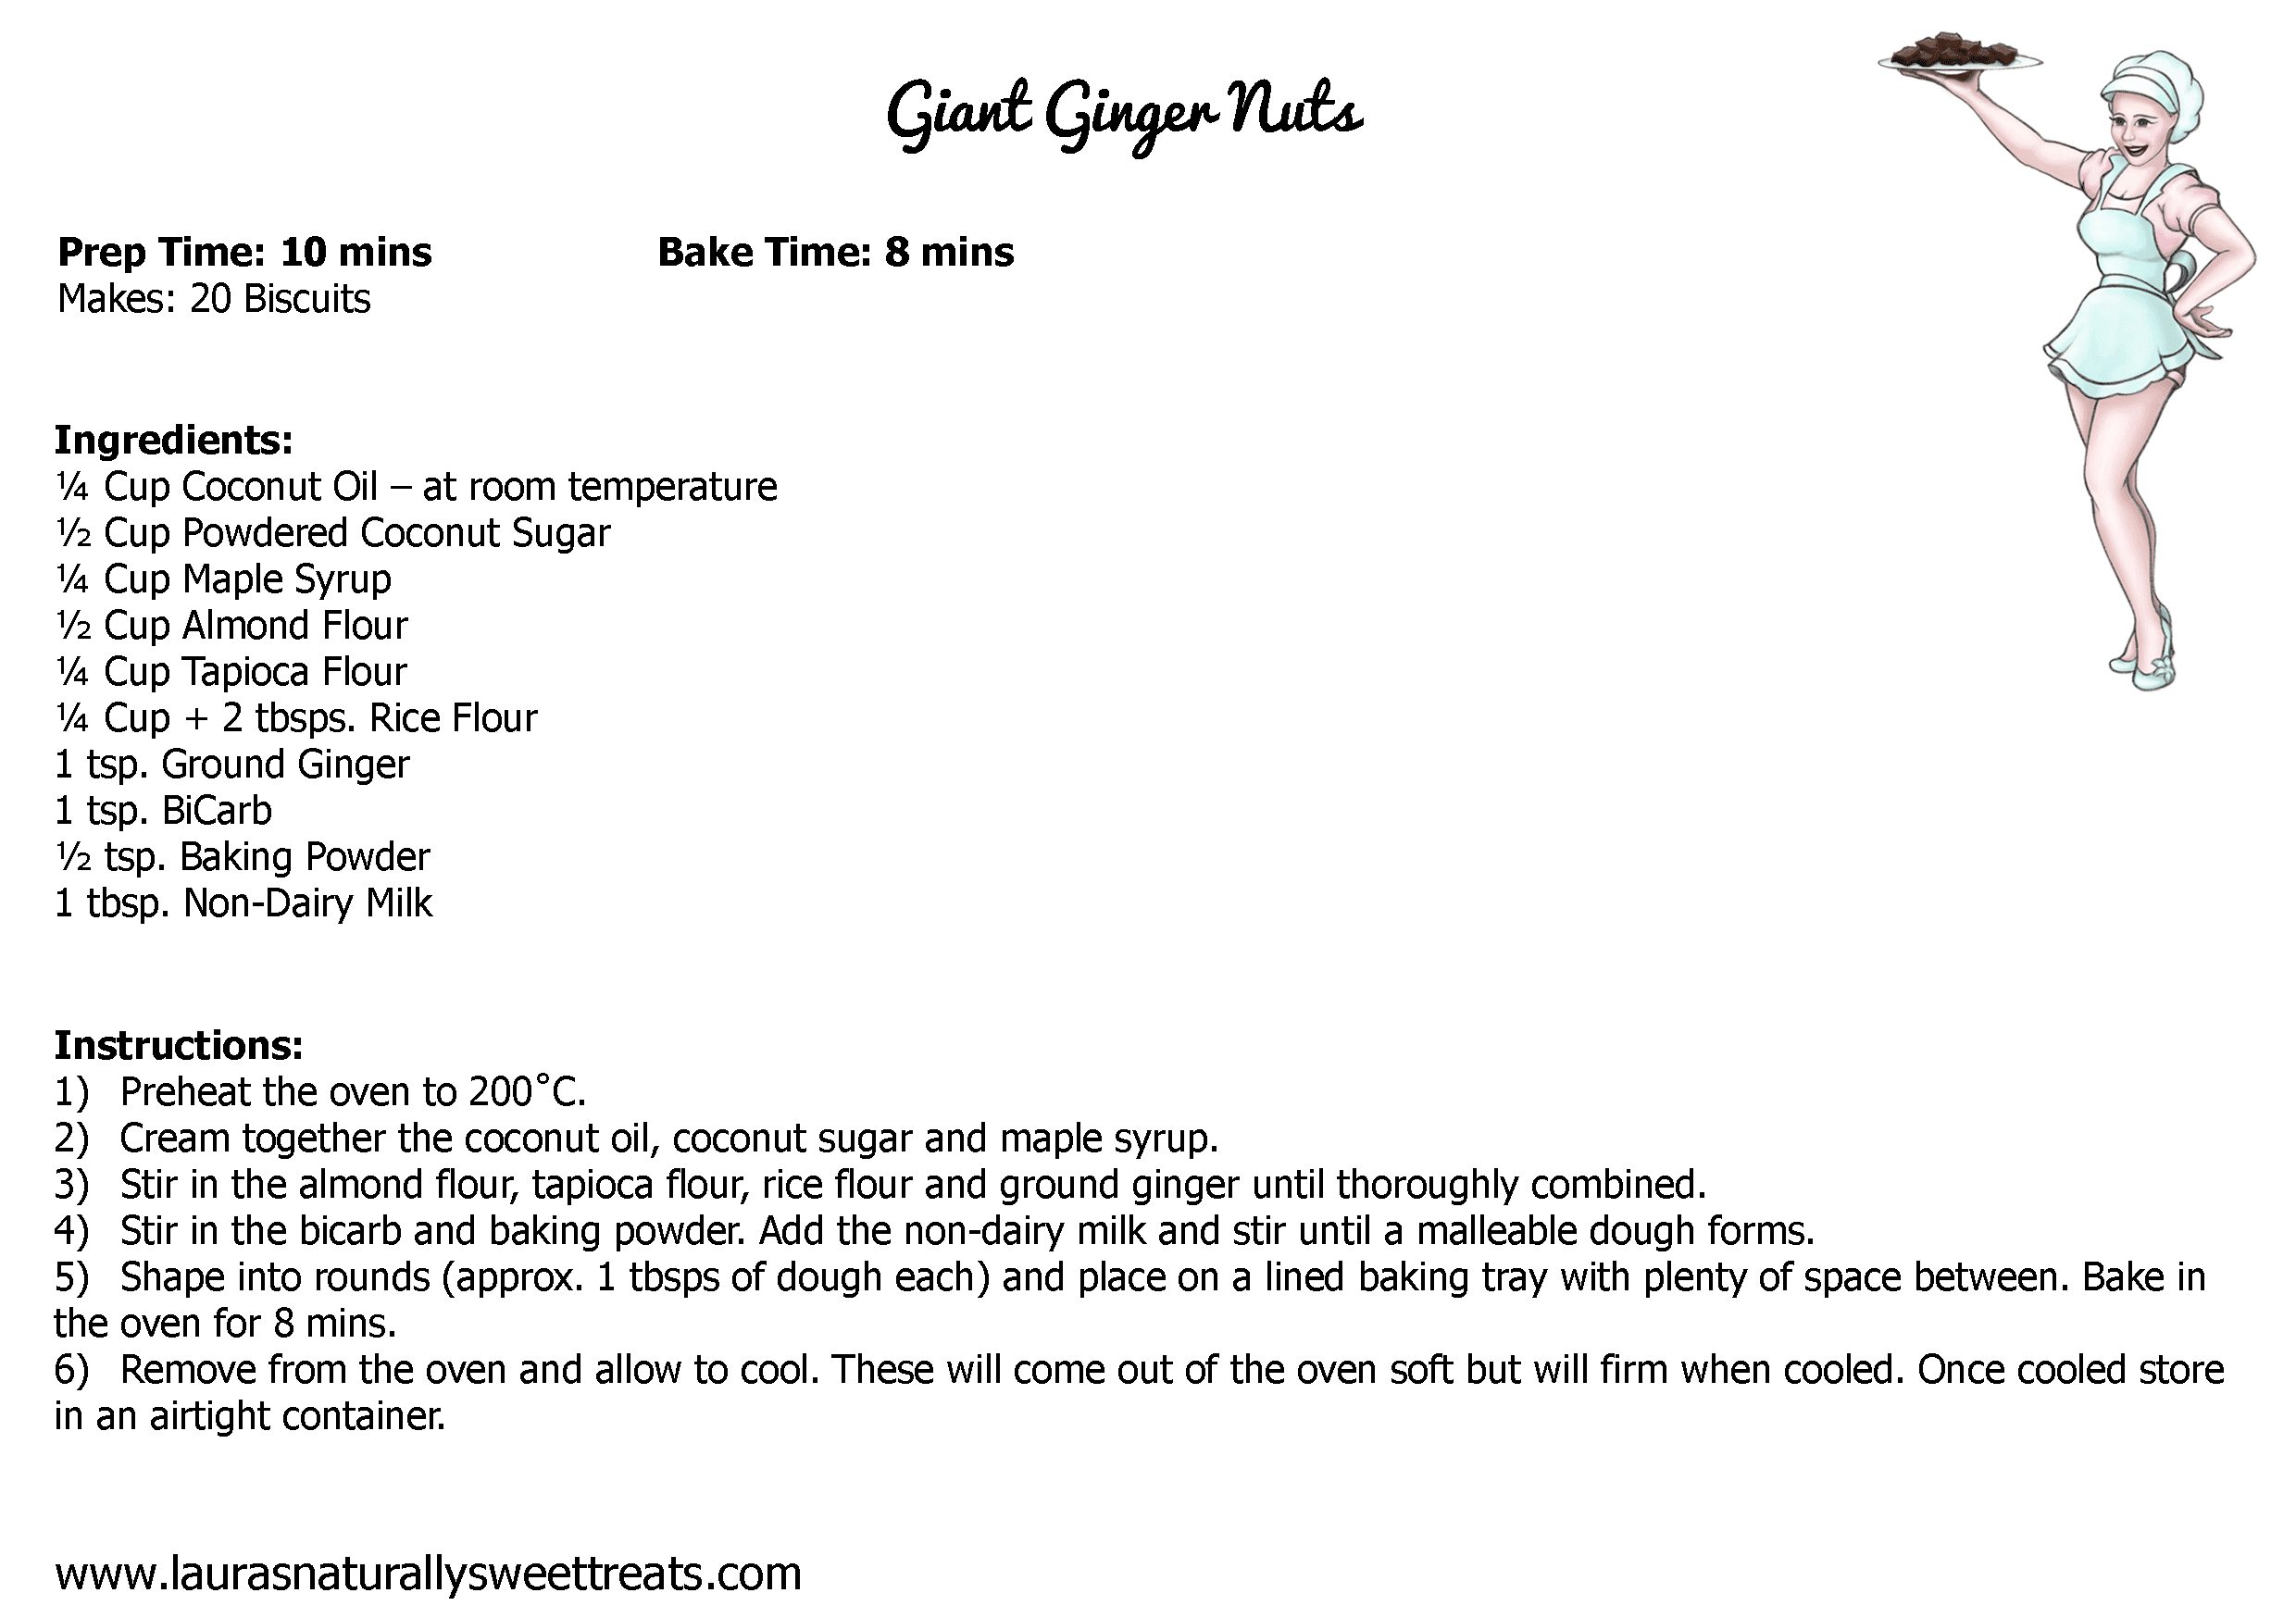 giant ginger nuts recipe card